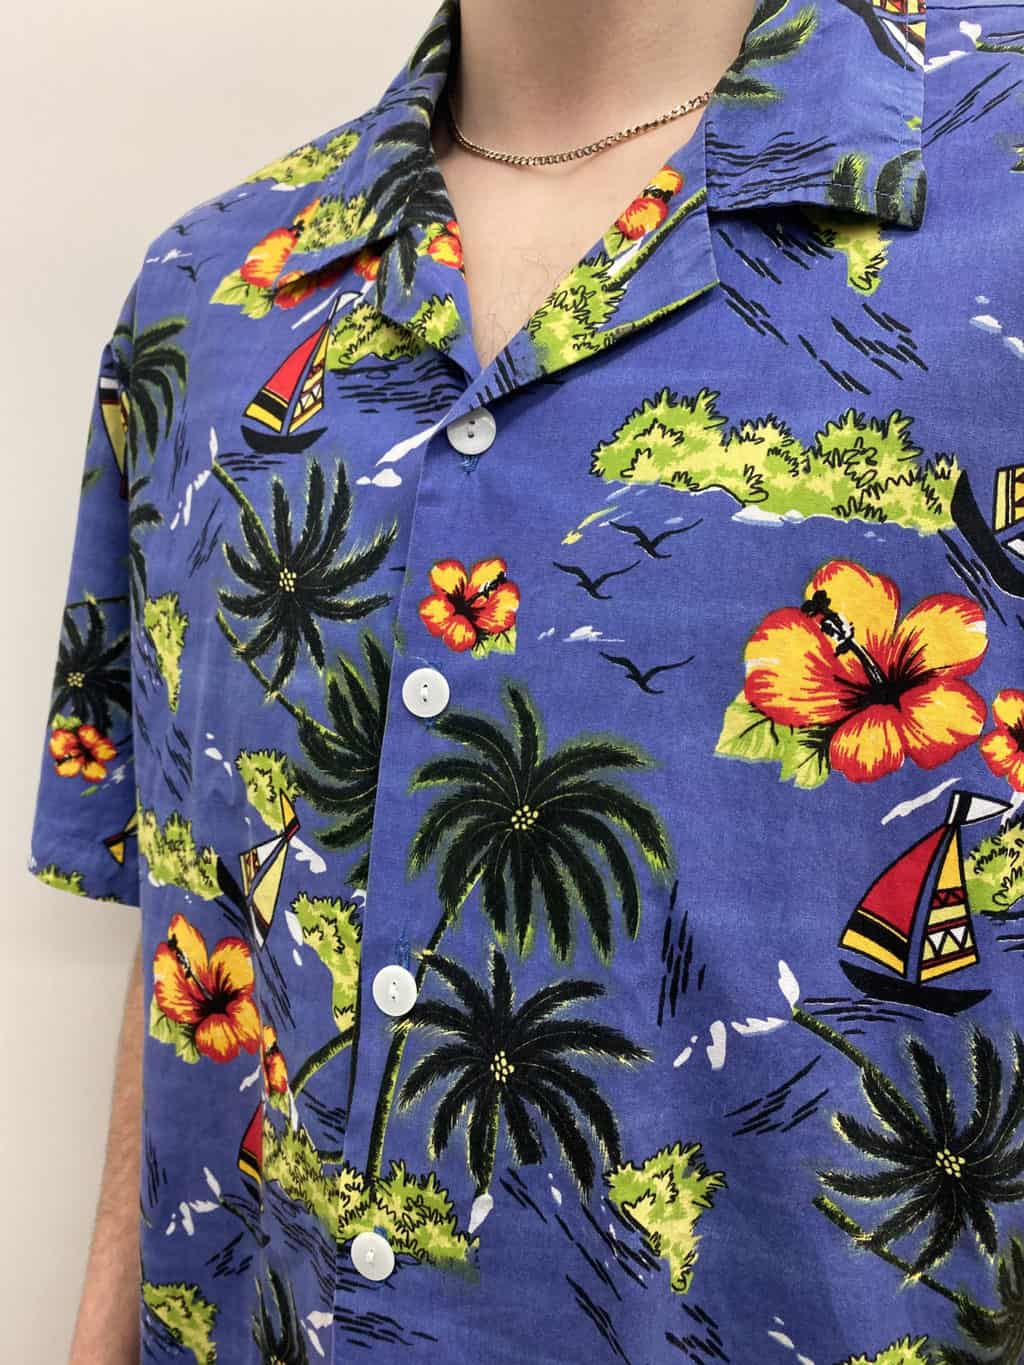 Mens bright vintage Hawaiian shirt with boats and palm trees floral green  blue yellow beach sea scene - L / XL - St Cyr Vintage